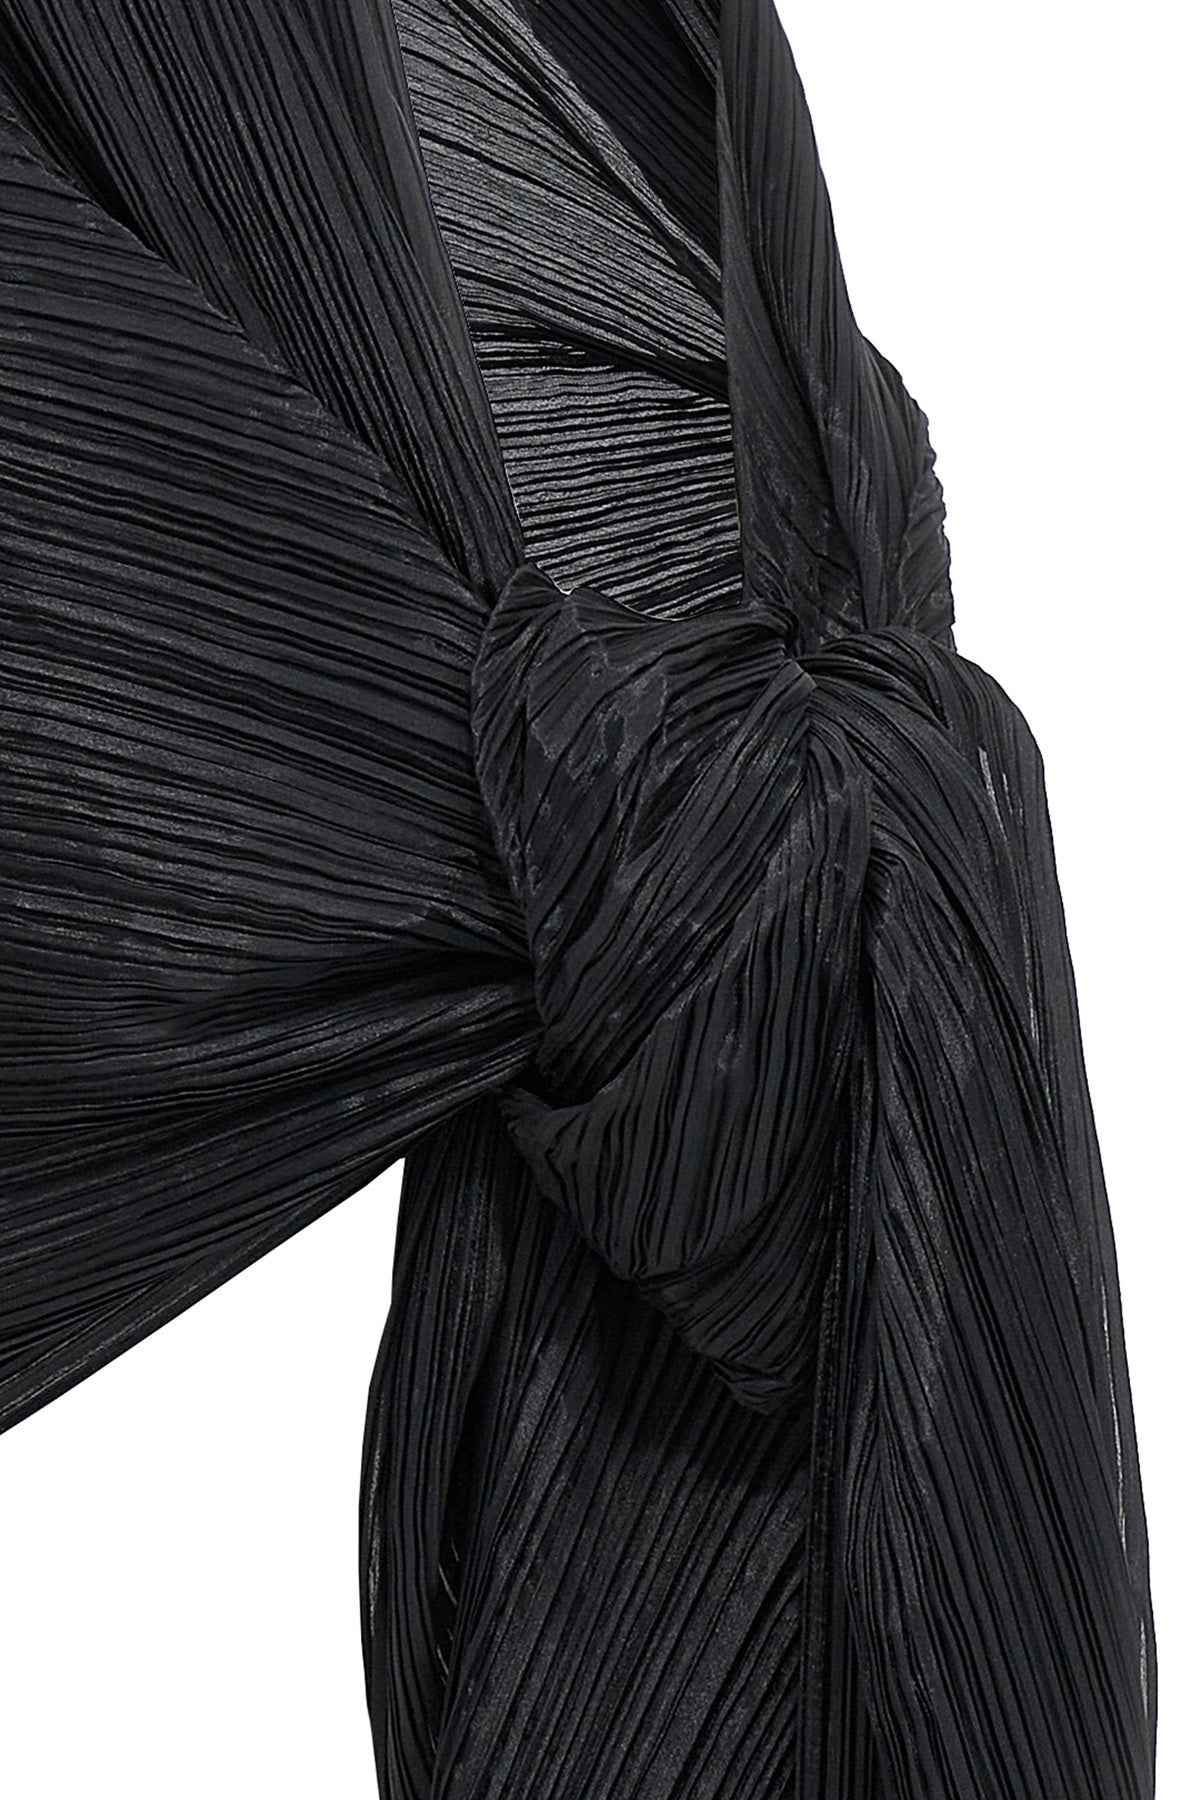 PLEATS PLEASE ISSEY MIYAKE 'BASIC MADAME-T' STOLE PP38AD10115